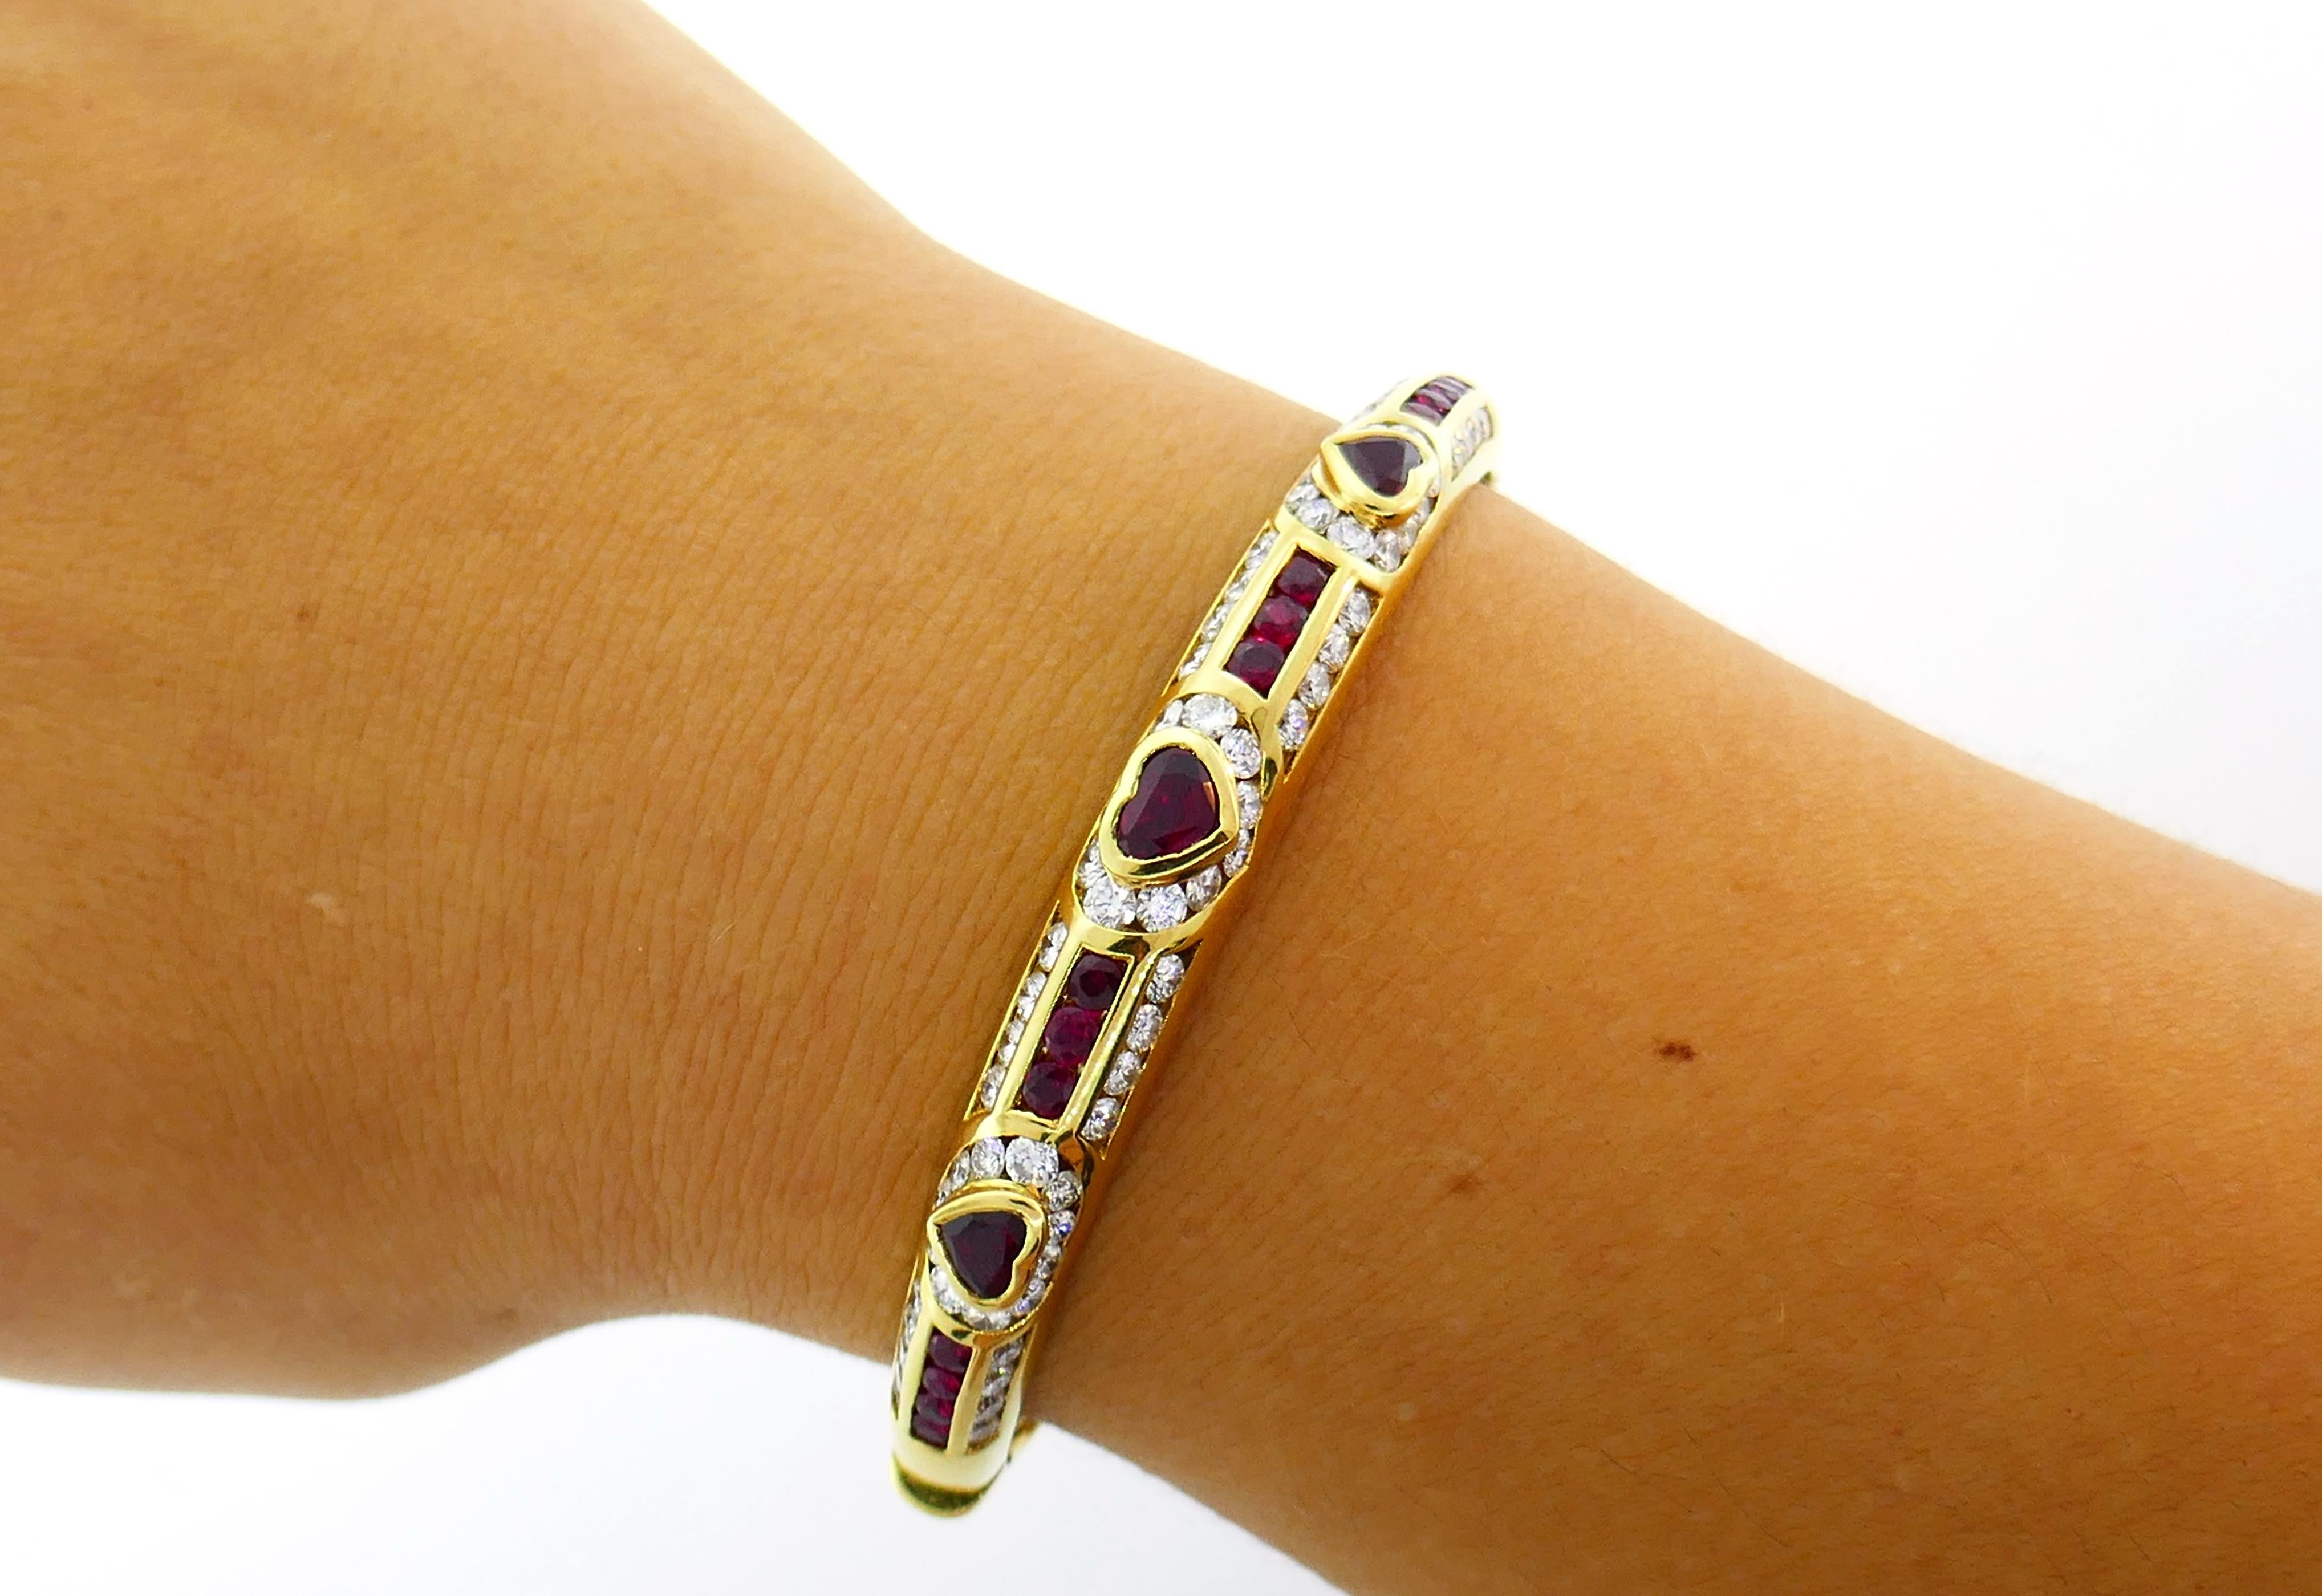 Elegant feminine bangle created by Fred Paris in the 1970s. Colorful and wearable, the bracelet is a great addition to your jewelry collection. The bangle features three heart cut rubies - a perfect gift for Valentine's!
Made of 18 karat yellow